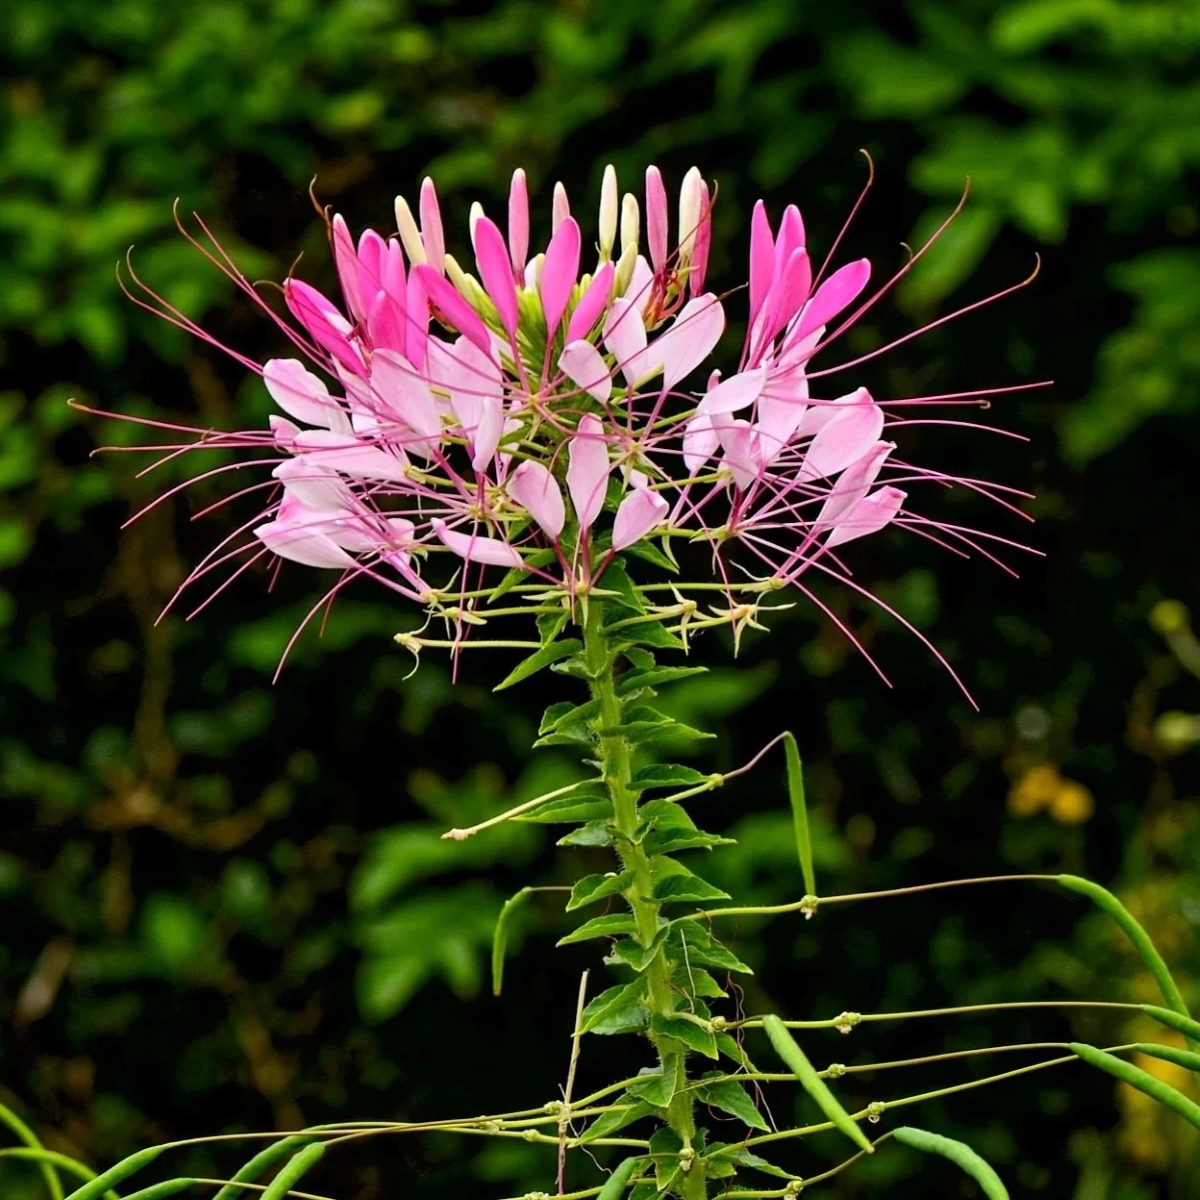 flowers that attract bees - spider flower in shades of pink